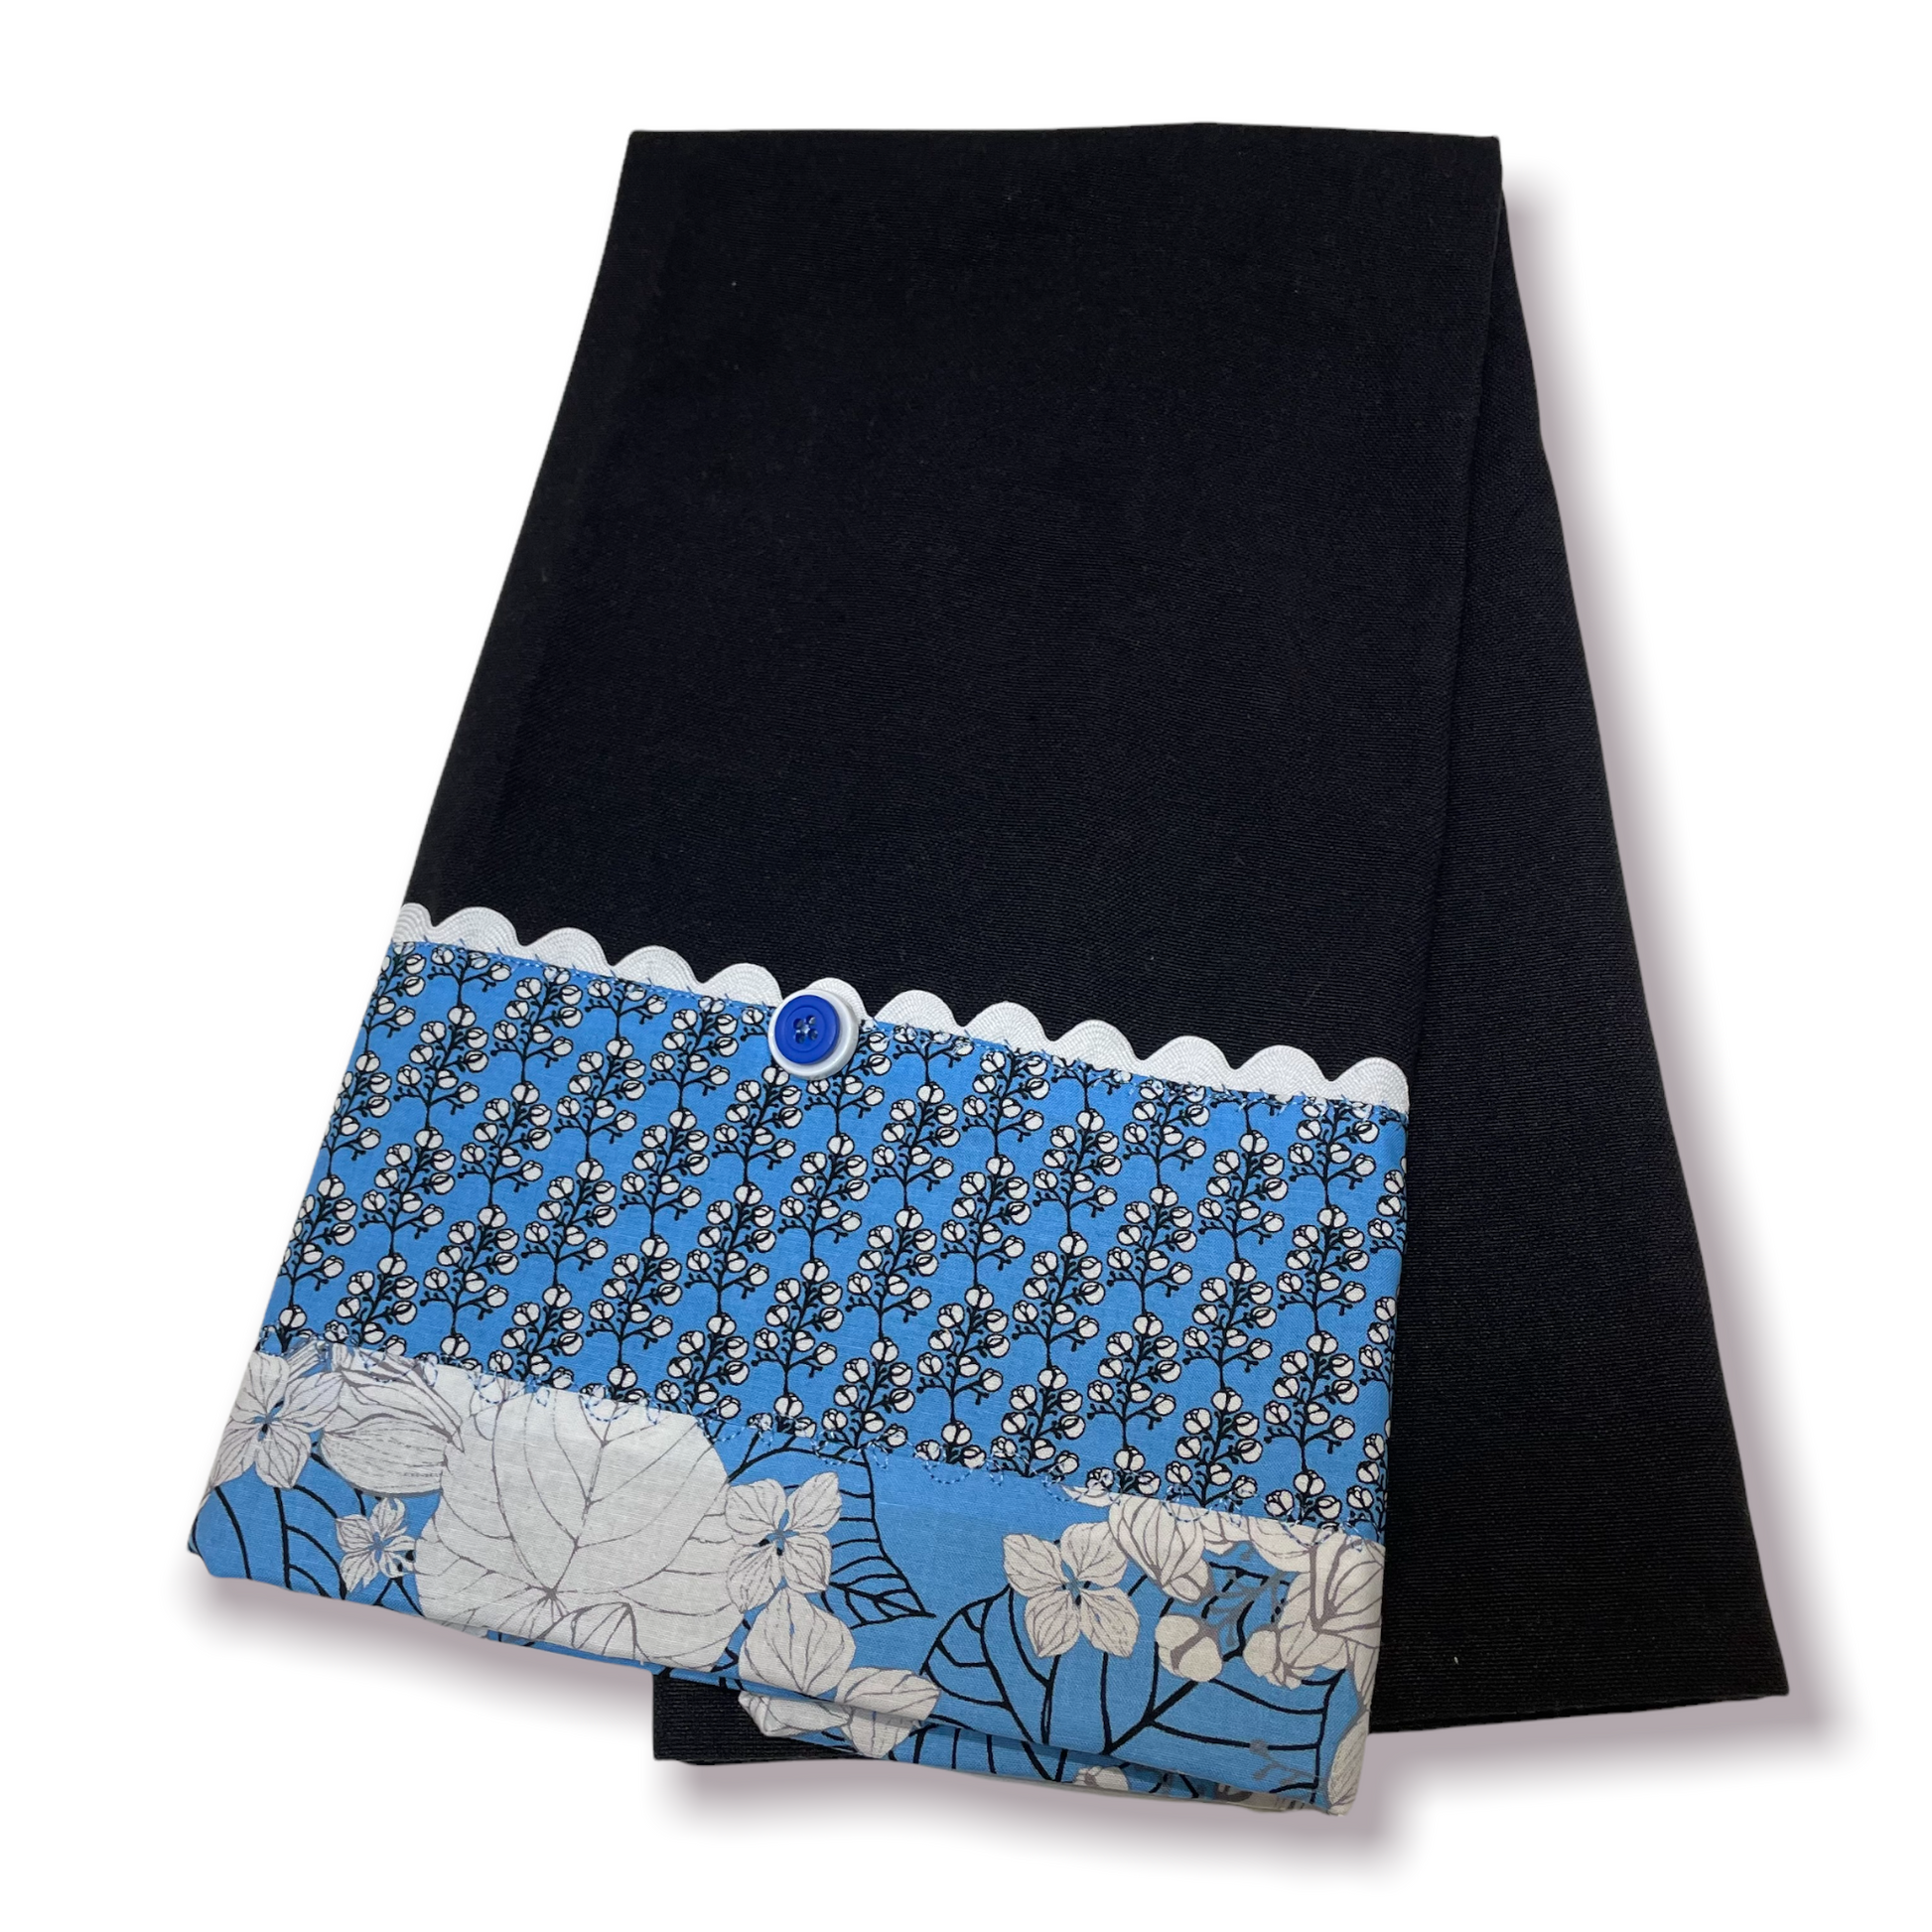 Blue and Black handcrafted in Canada Dish Towel. Featuring RicRac, Embroidery Stitching and Buttons. Shop coordinated kitchen and home decor or learn to make your own with sewing tutorials on the Home Stitchery Decor YouTube Channel. 